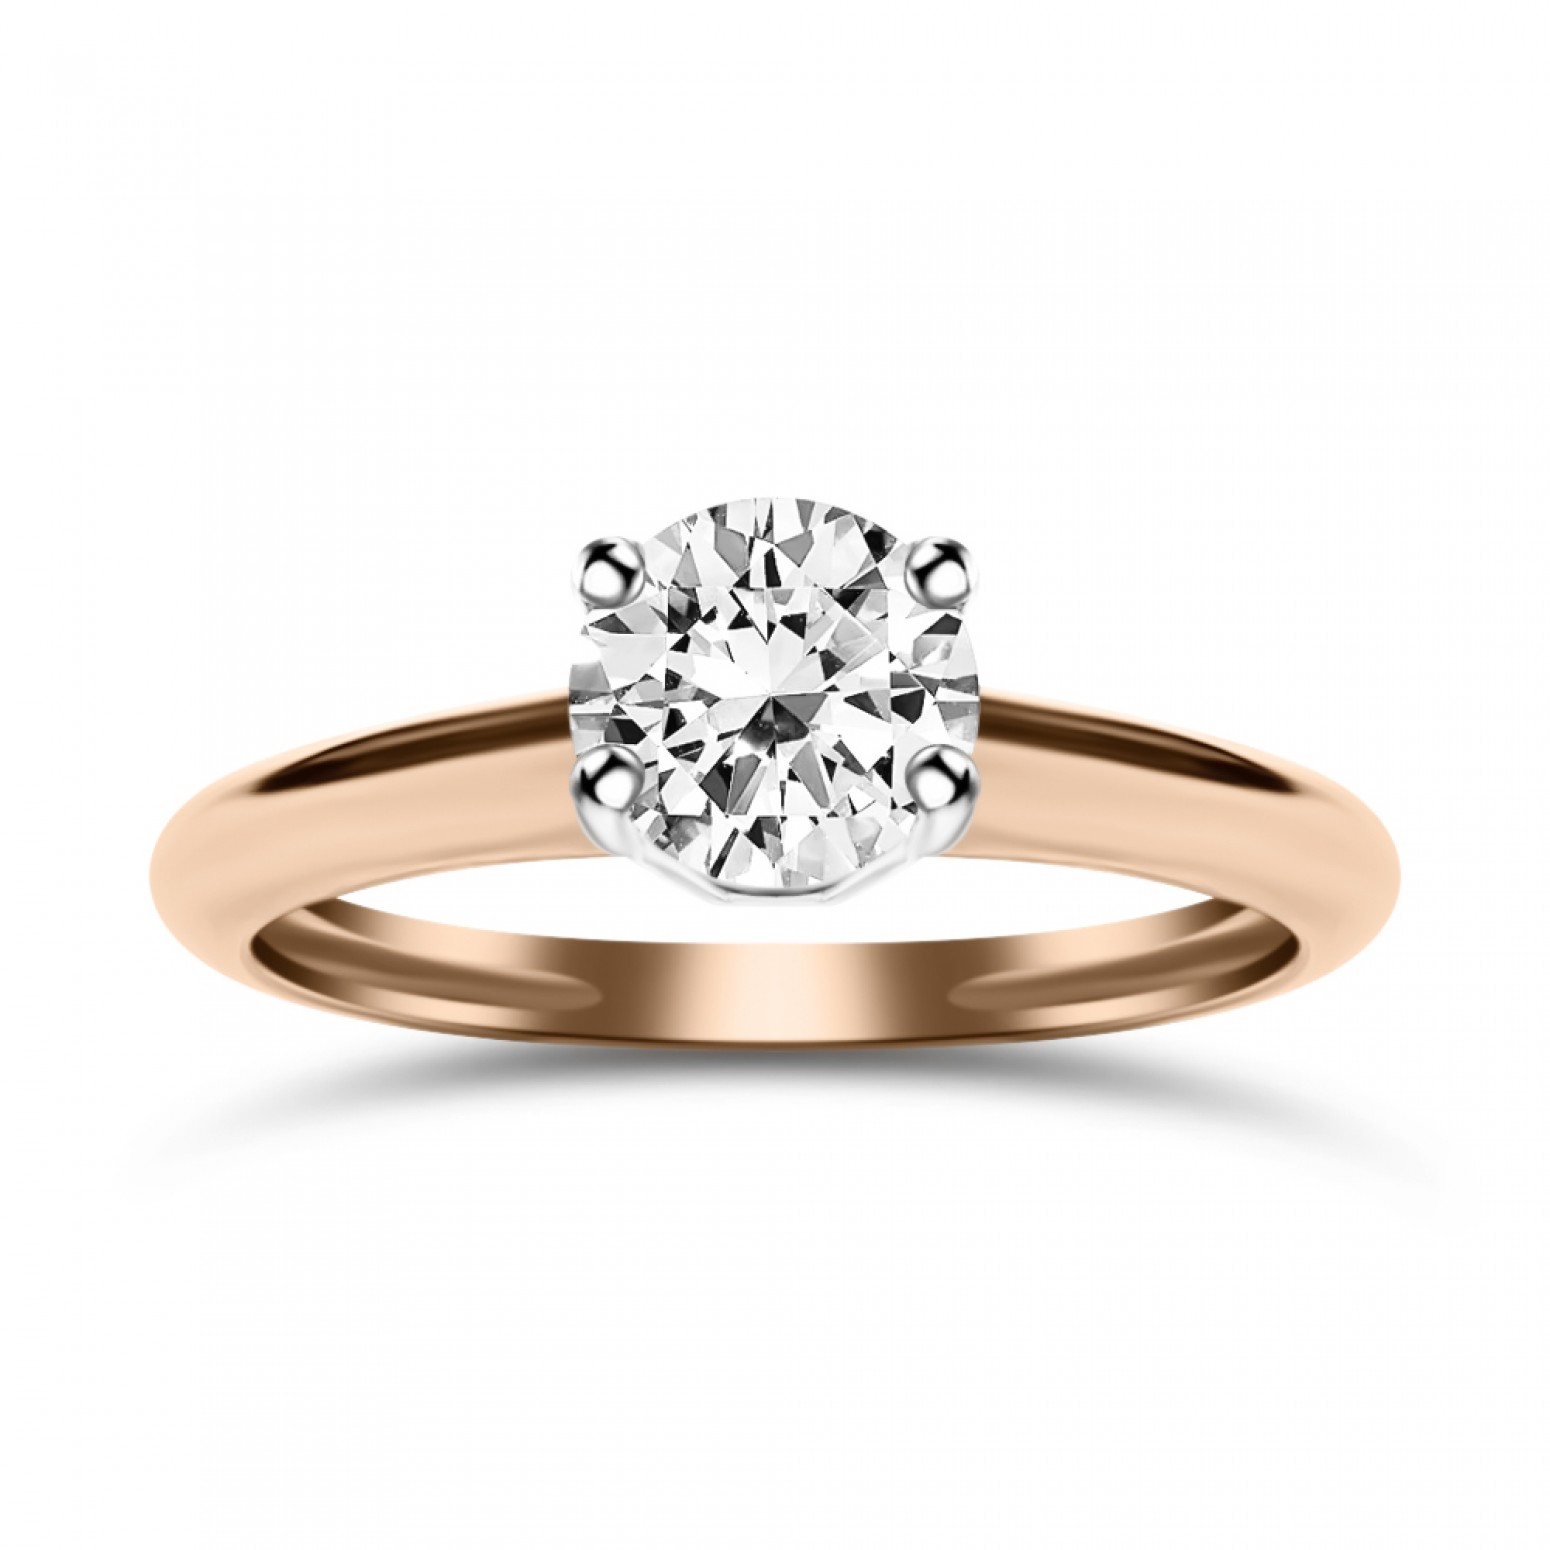 Solitaire ring 14K pink gold with zircon, da4145 ENGAGEMENT RINGS Κοσμηματα - chrilia.gr